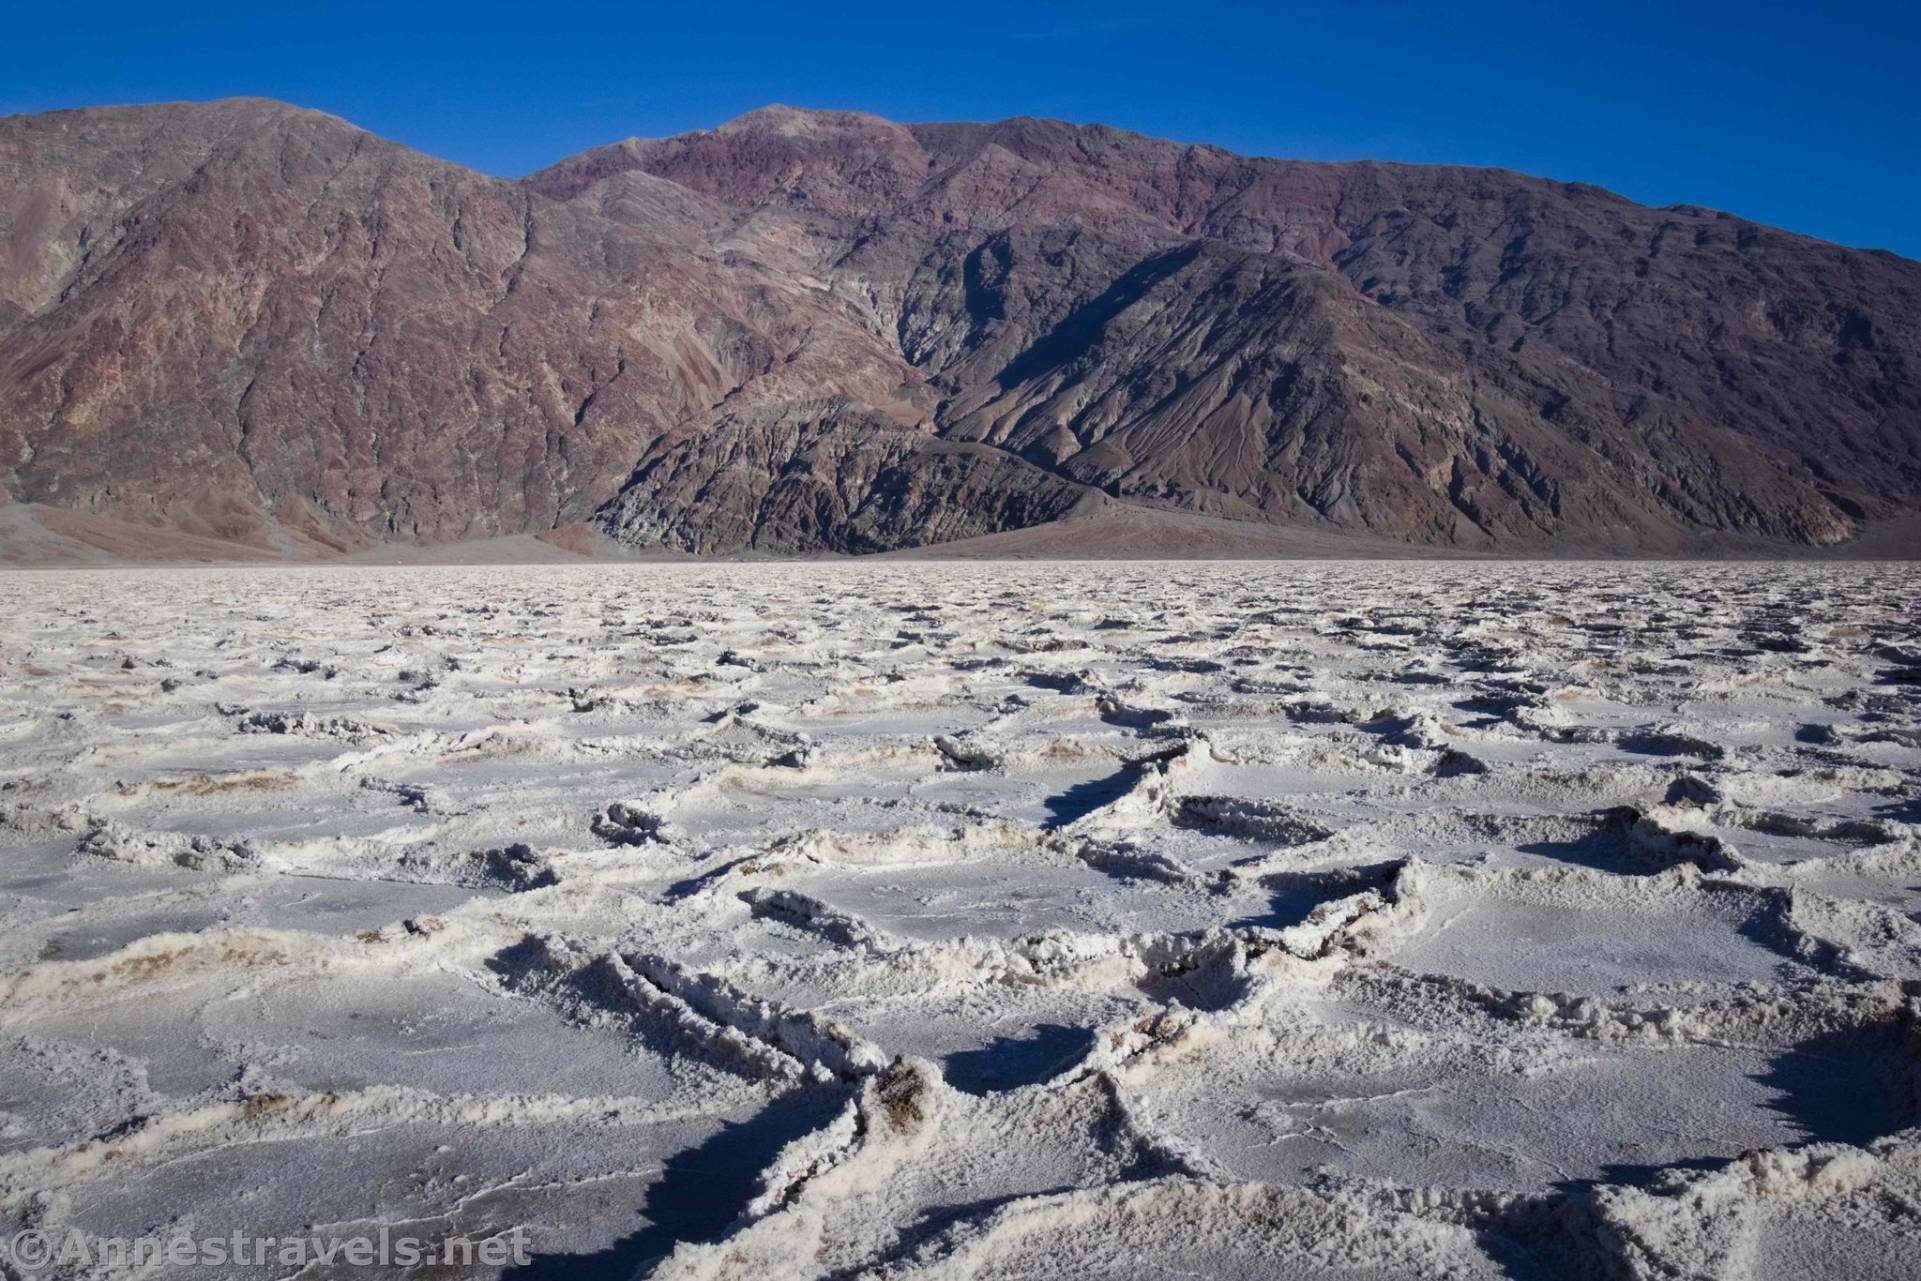 The Black Mountains from Badwater Flats, Death Valley National Park, California